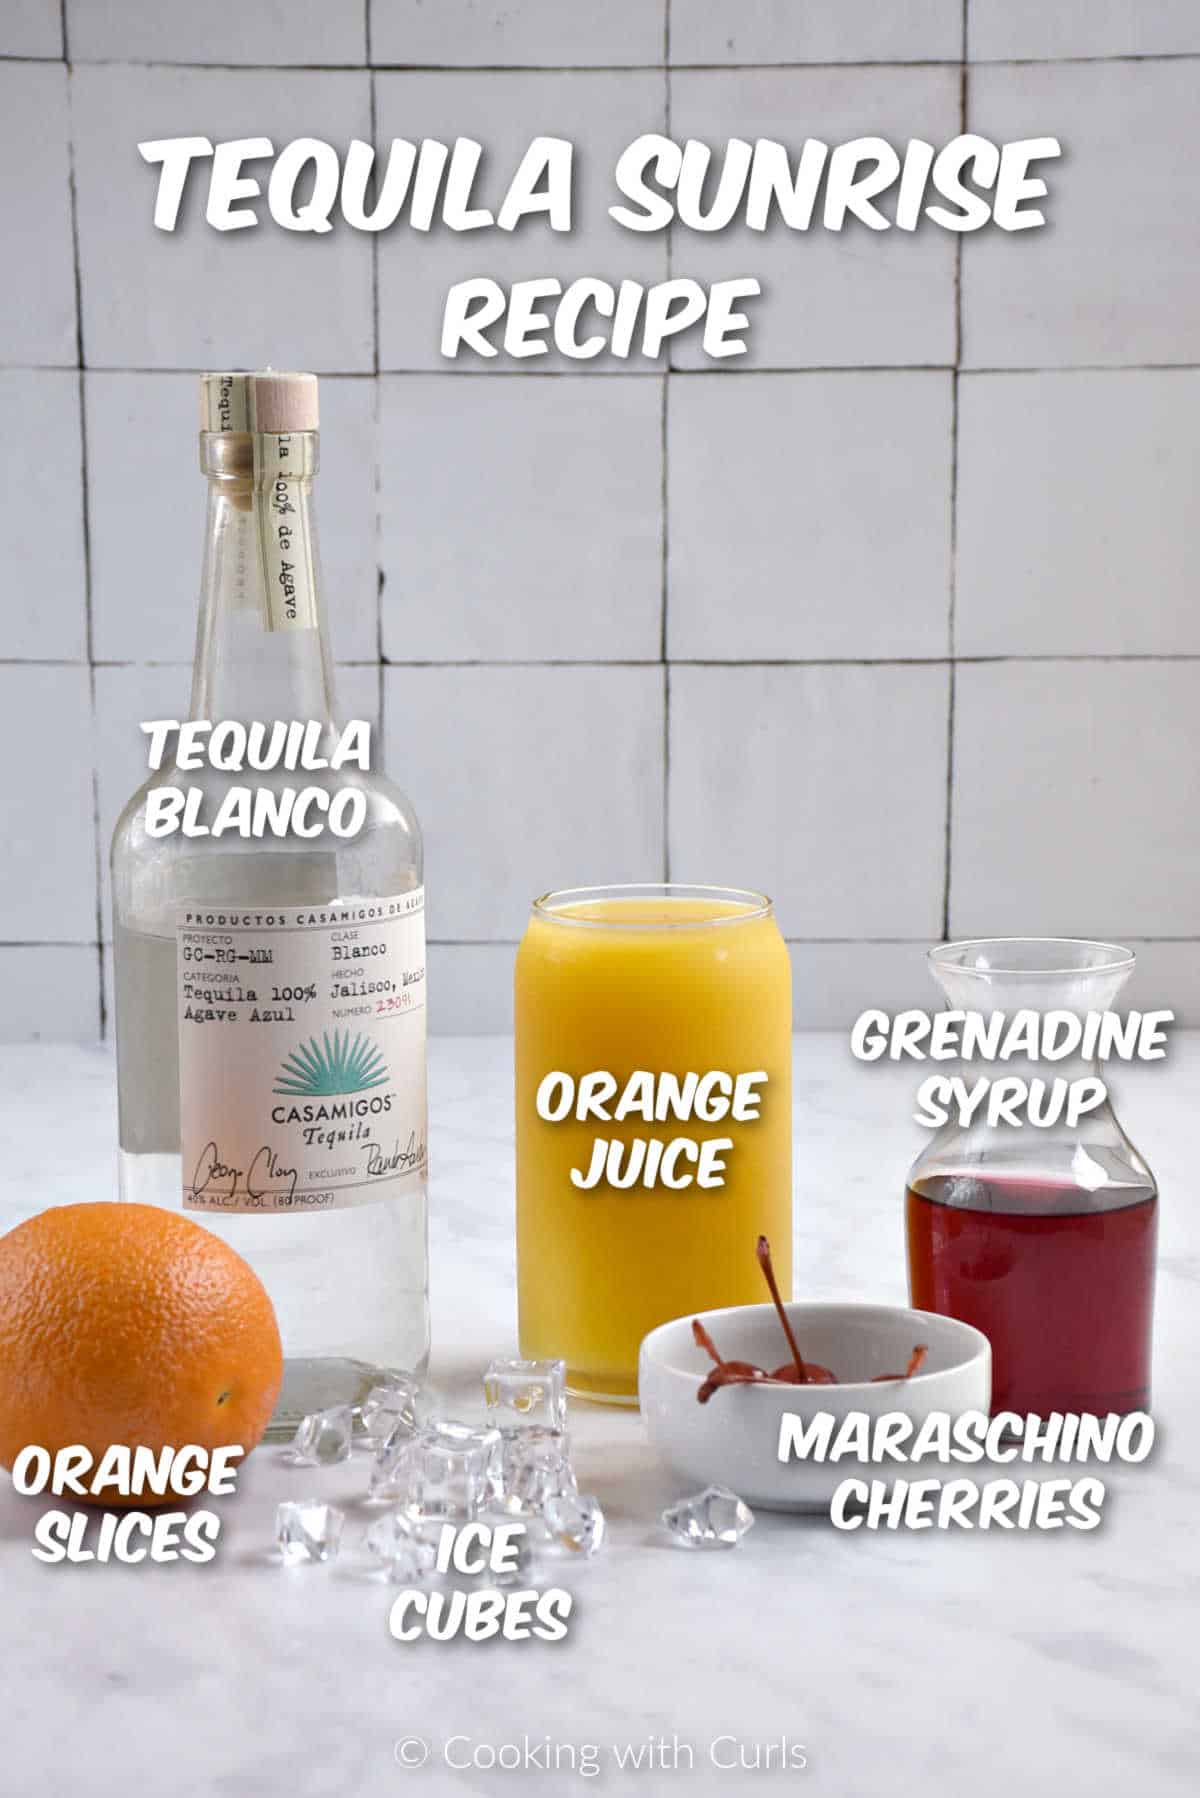 Ingredients needed to make tequila sunrise recipe.